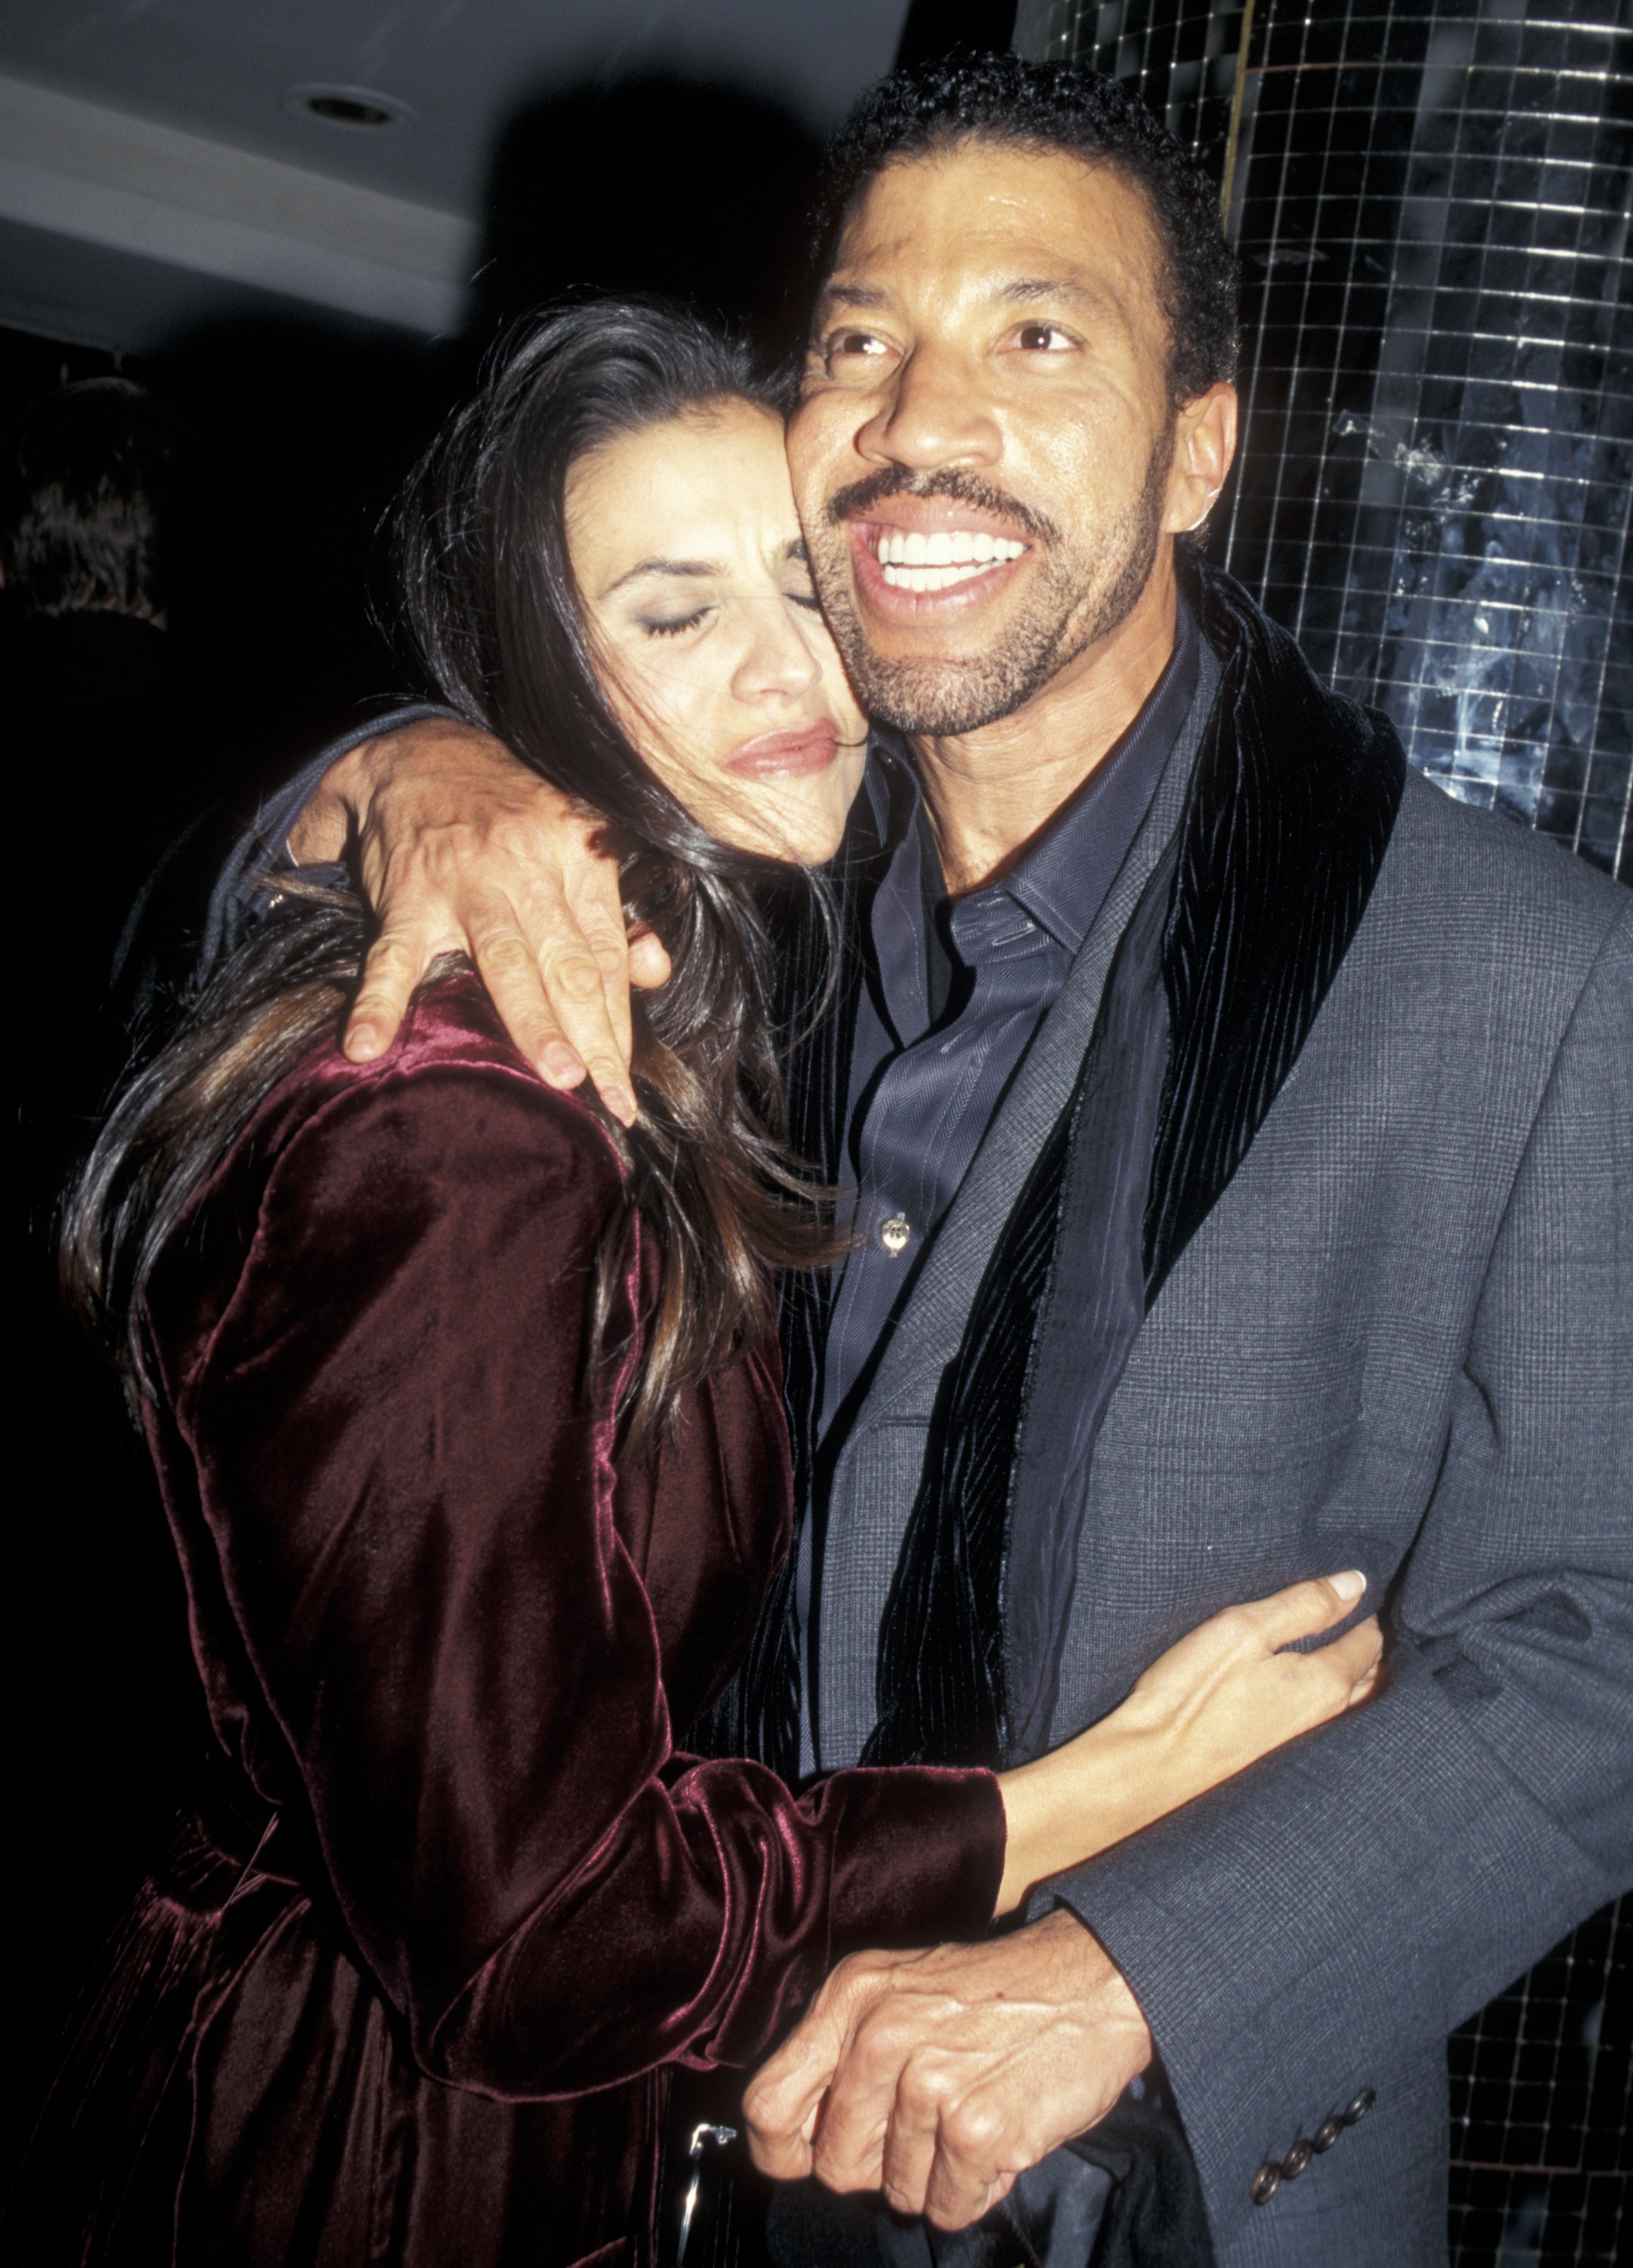 Lionel Richie and Diane Alexander at the premiere of "The preacher's wife" on December 9, 1996 at the Ziegfeld Theater in New York City.  |  Source: Getty Images